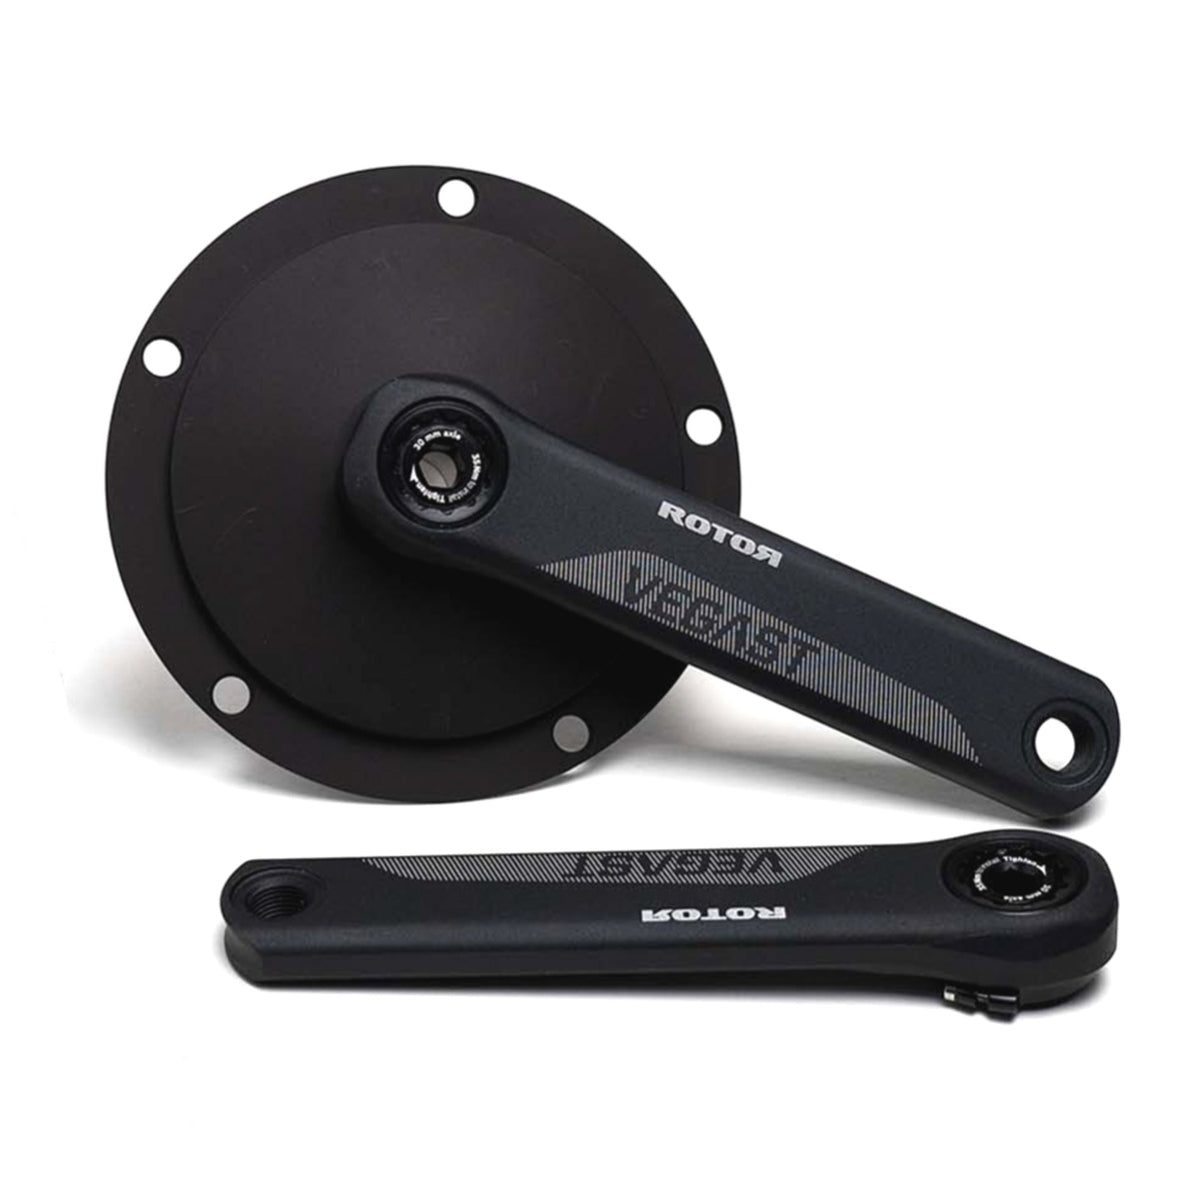 Rotor ALDHU 3D Track fixed gear crank arms, spider & axle